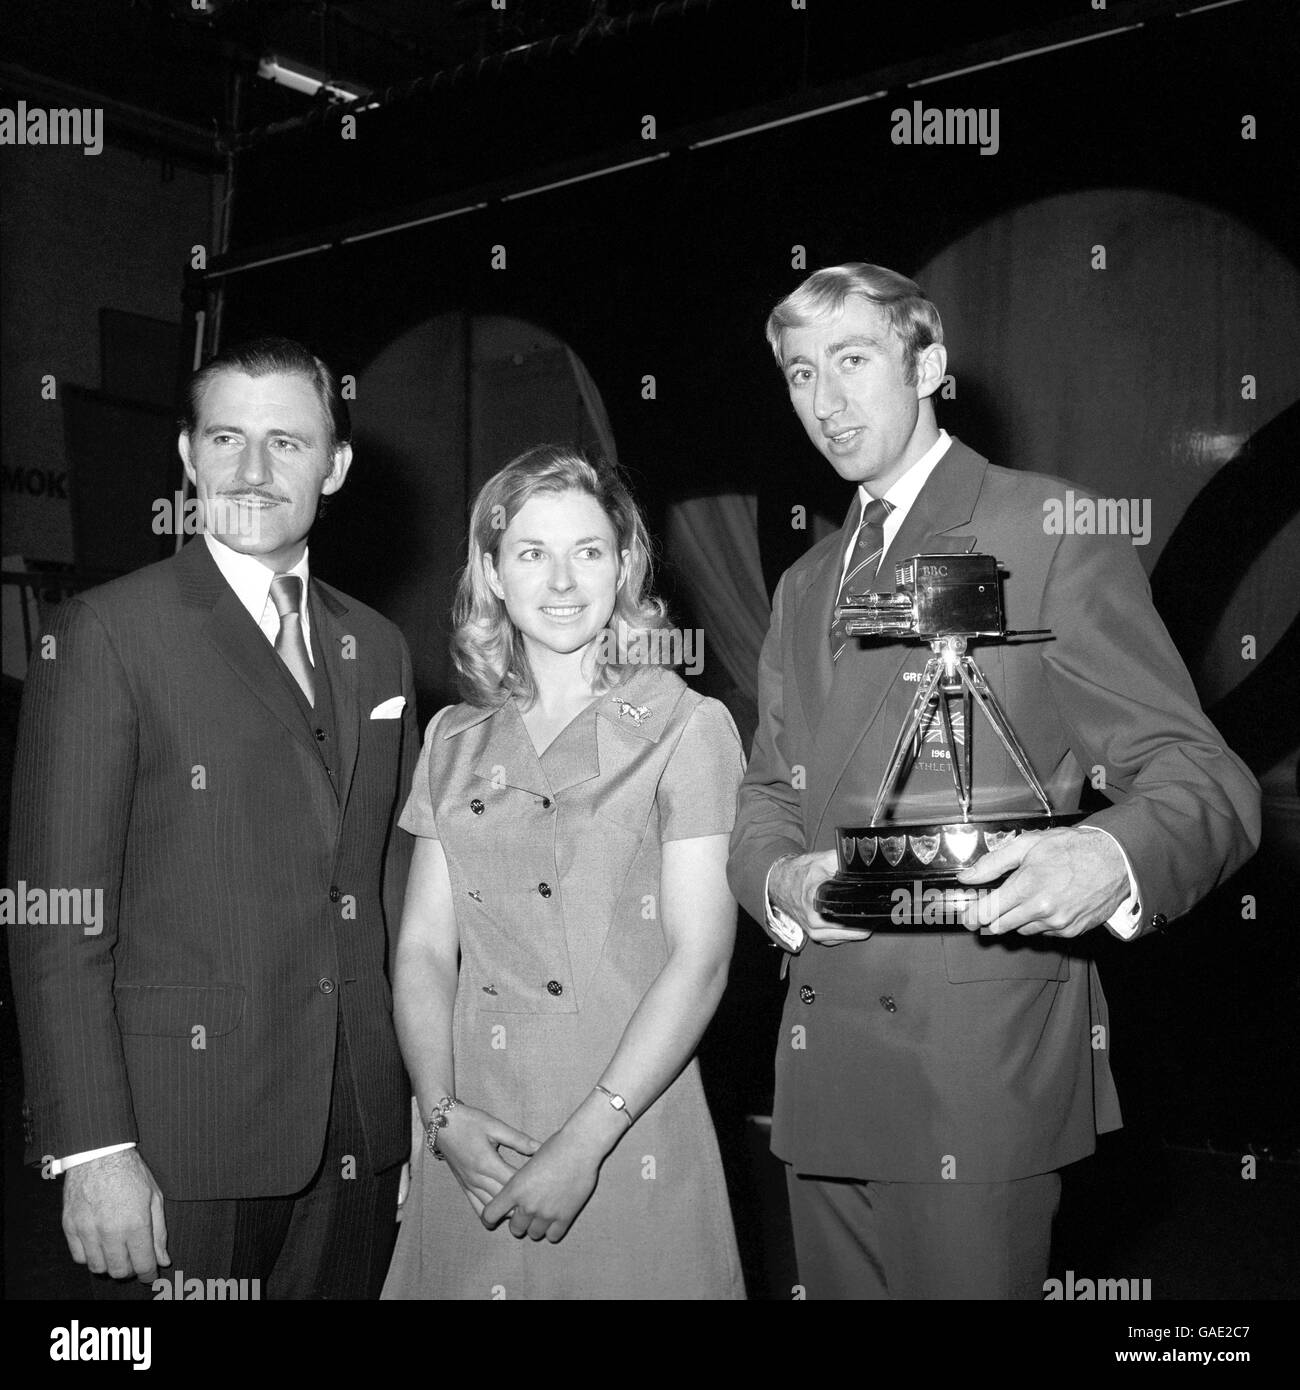 Winners of the BBC's 'Sportsview Personalities of 1968' awards after the presentations at the Television Theatre, Golders Green, London tonight. Left to right: Graham Hill, world racing champion, who was second; Marion Coakes, silver medallist in Olympic individual show jumping in the Mexico Olympics, third; and David Hemery, Olympic gold medallist who won the 400 metres hurdles at Mexico. He won the top sports award and is seen holding the trophy that was presented to him tonight. Stock Photo